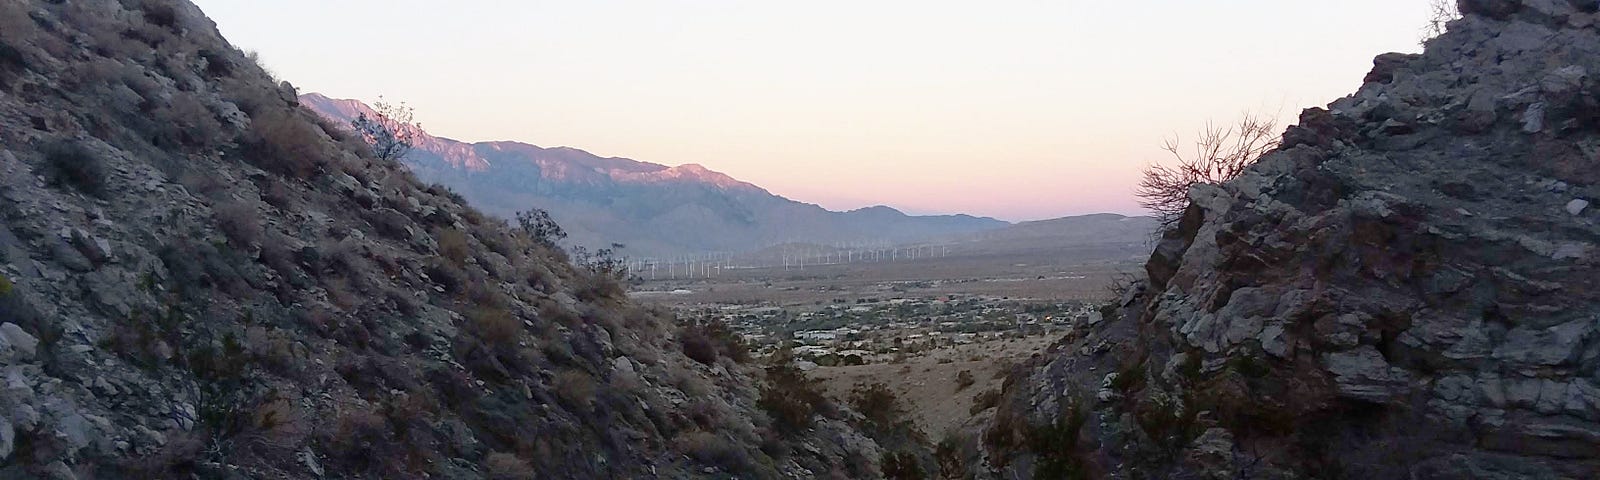 Two rocky nearby hills parting to reveal a valley with a town, windmills, and mountains on the horizon.